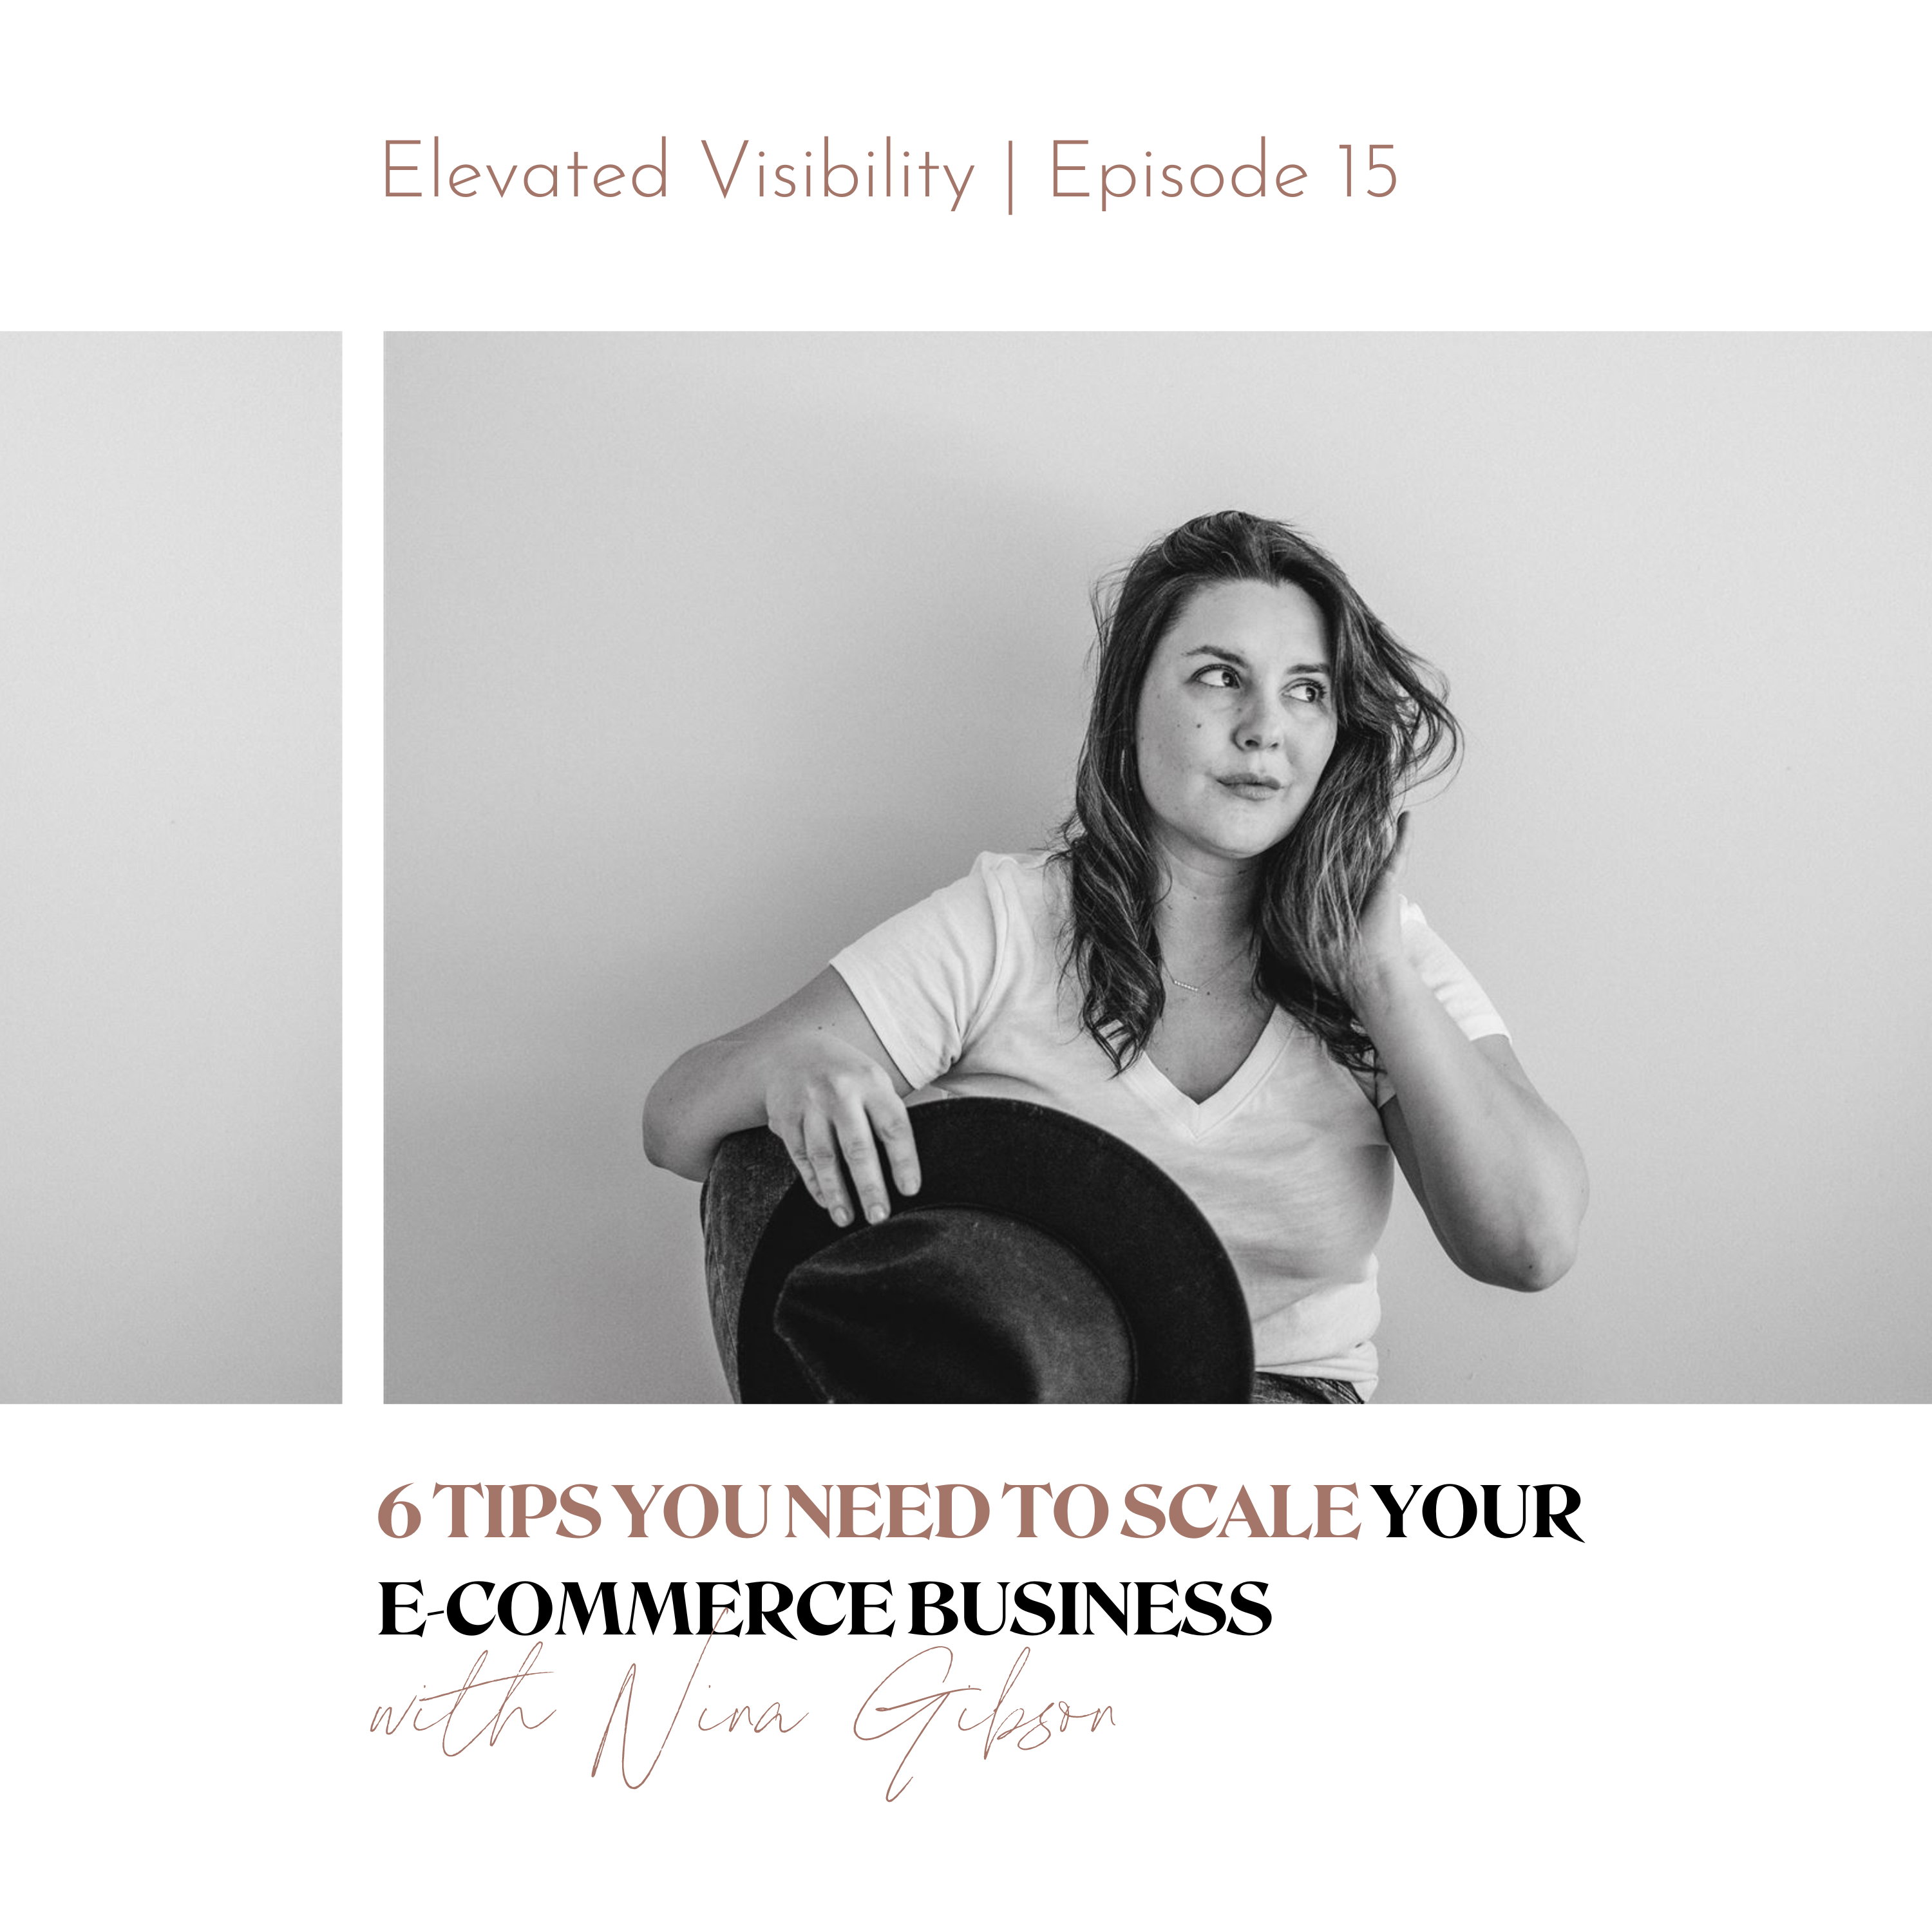 Cover Image for the Elevated Visibility Podcast E15